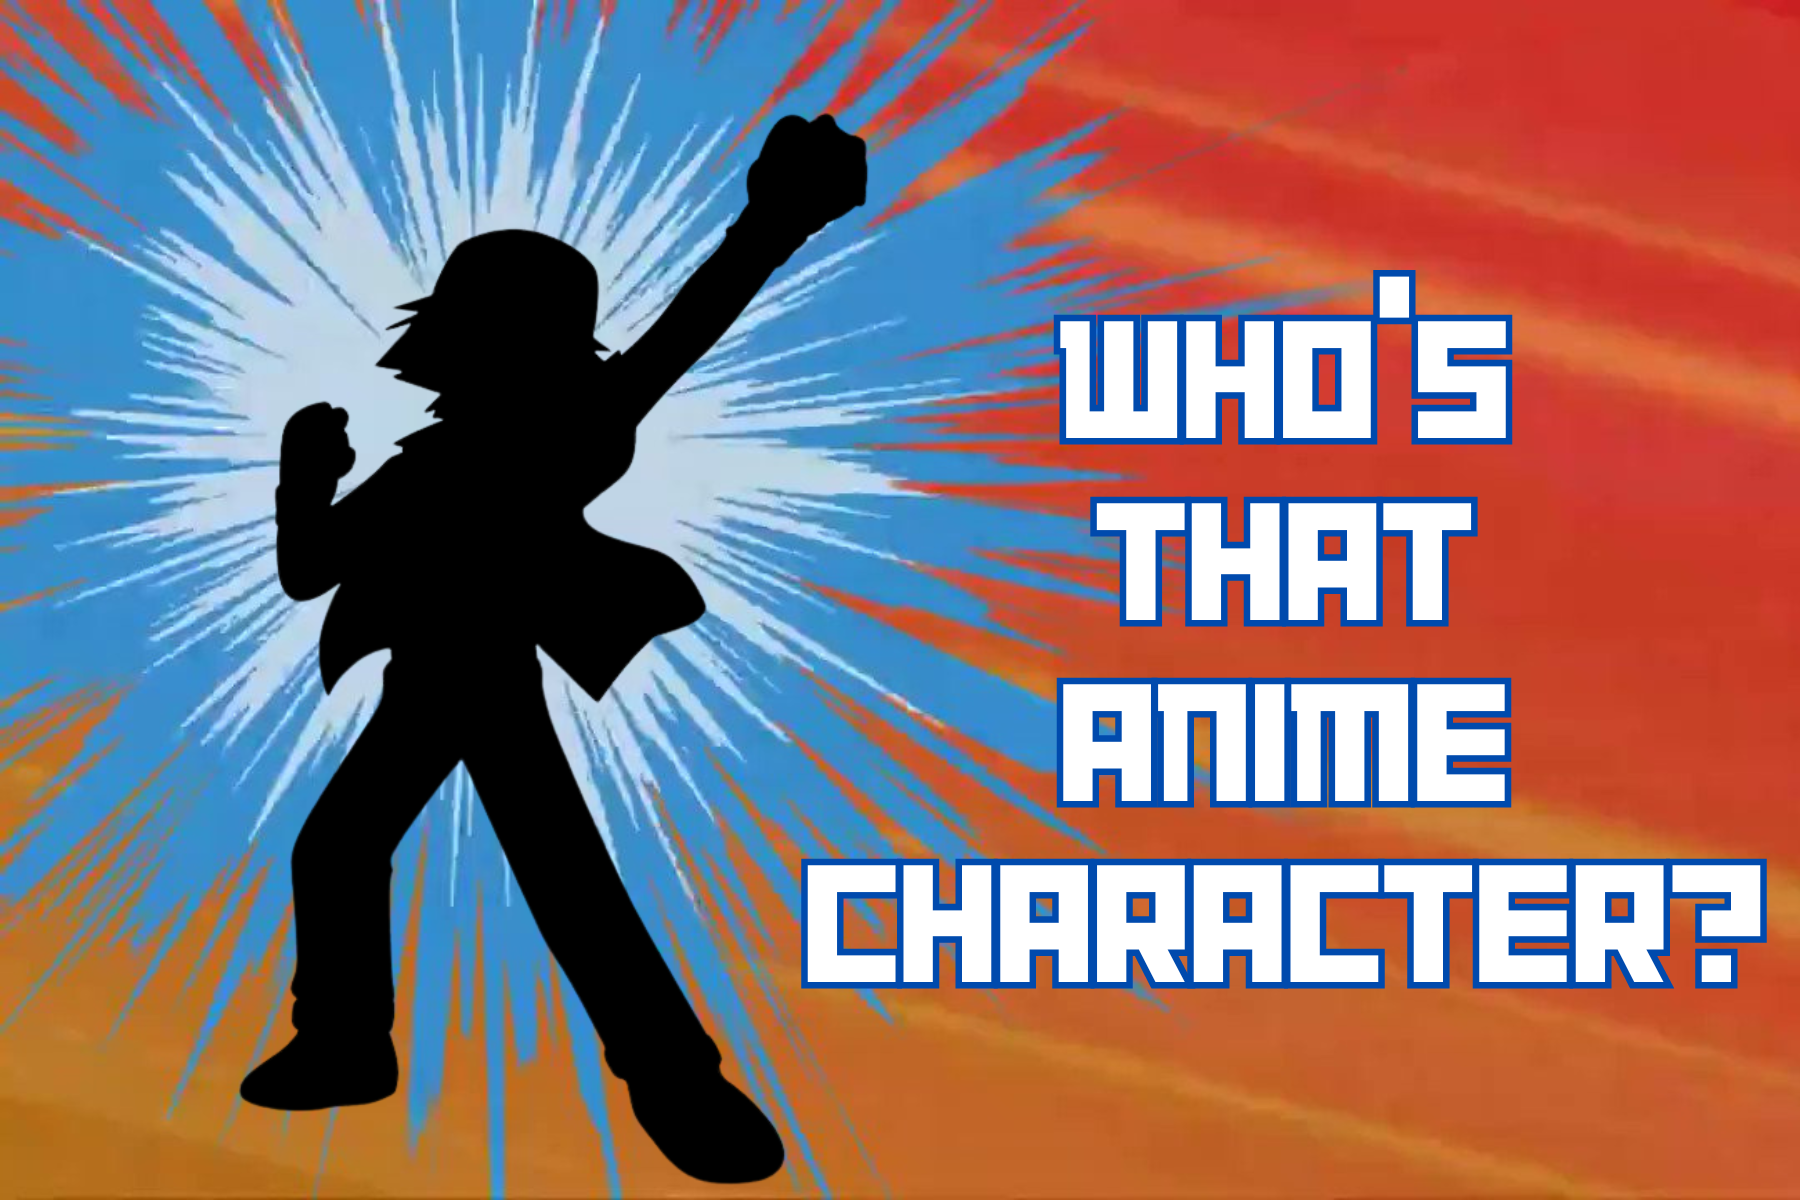 Guess the Anime Character by the Silhouette